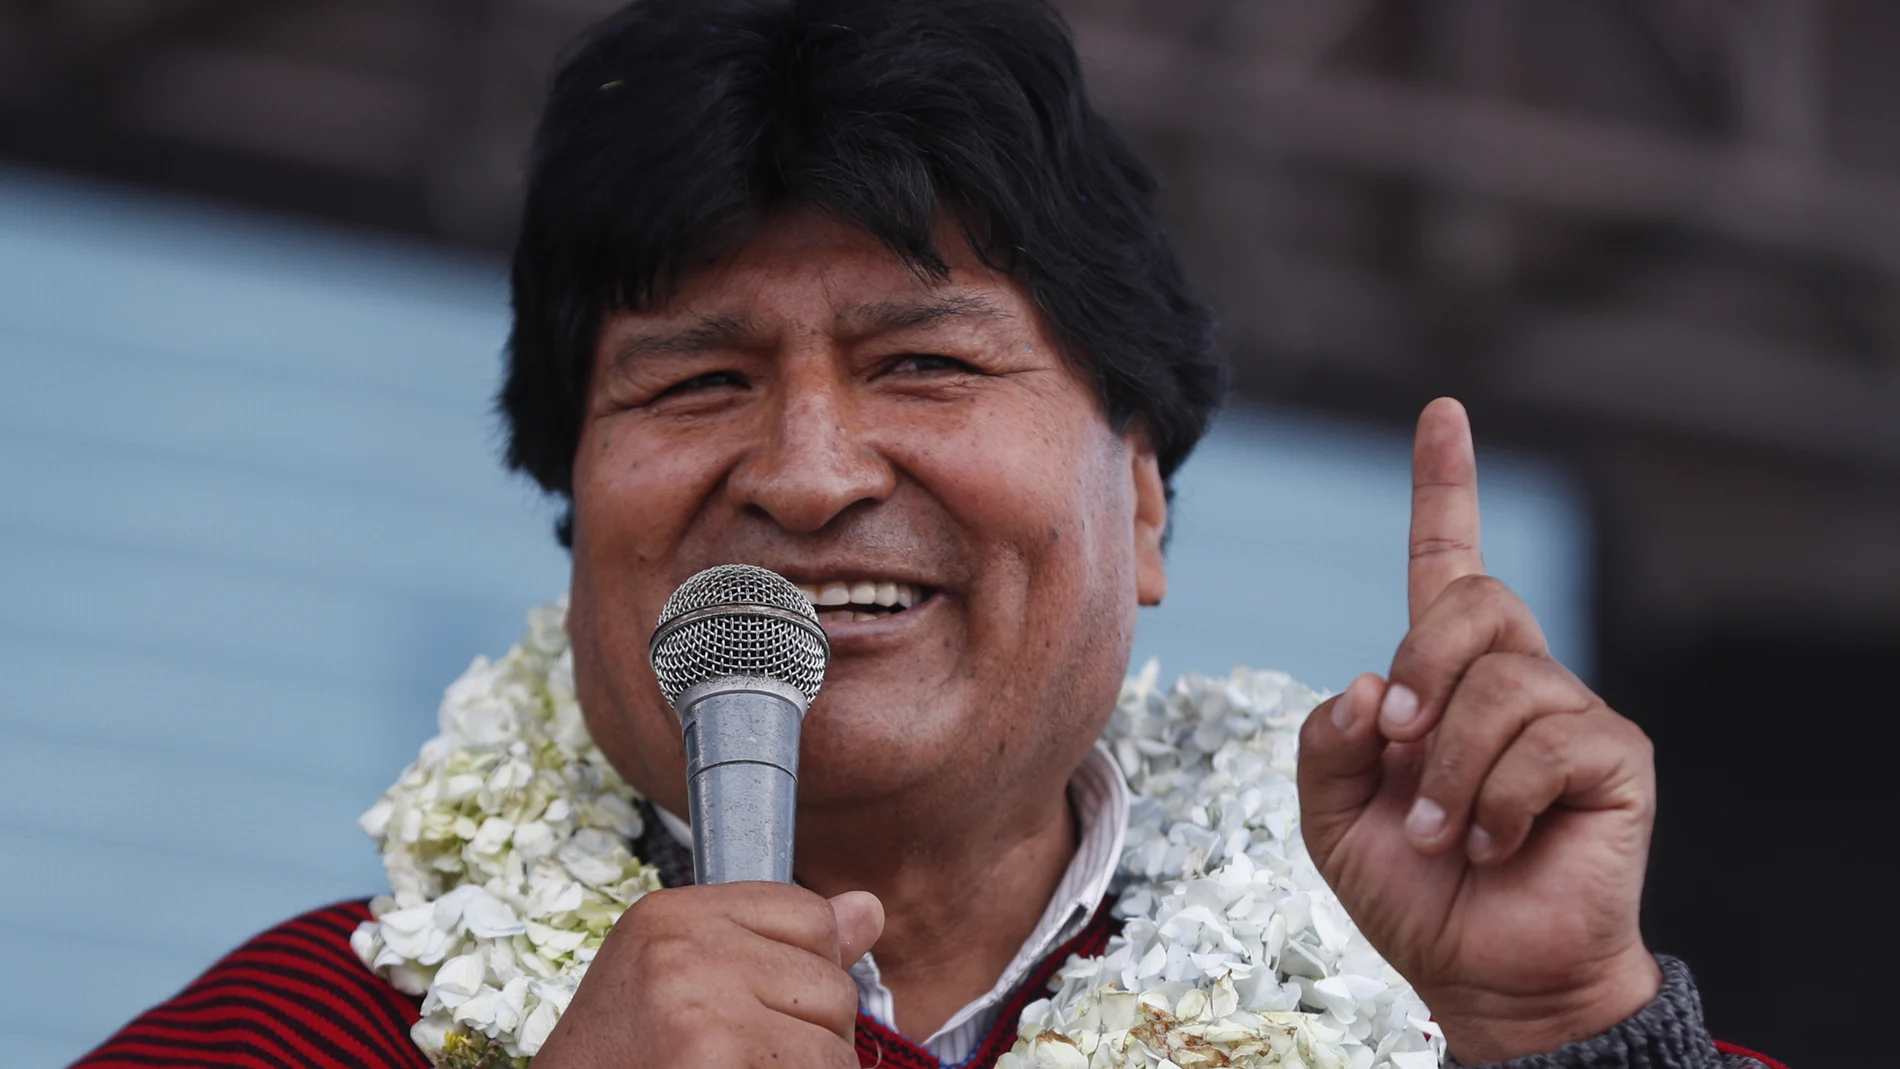 Former Bolivian President Evo Morales speak to supporters during a welcoming ceremony, in El Alto, Bolivia, Thursday, Dec. 3, 2020. Morales returned to Bolivia in early November following an election that returned his socialist party to power a year after he fled the nation amid a wave of protests. (AP Photo/Juan Karita)